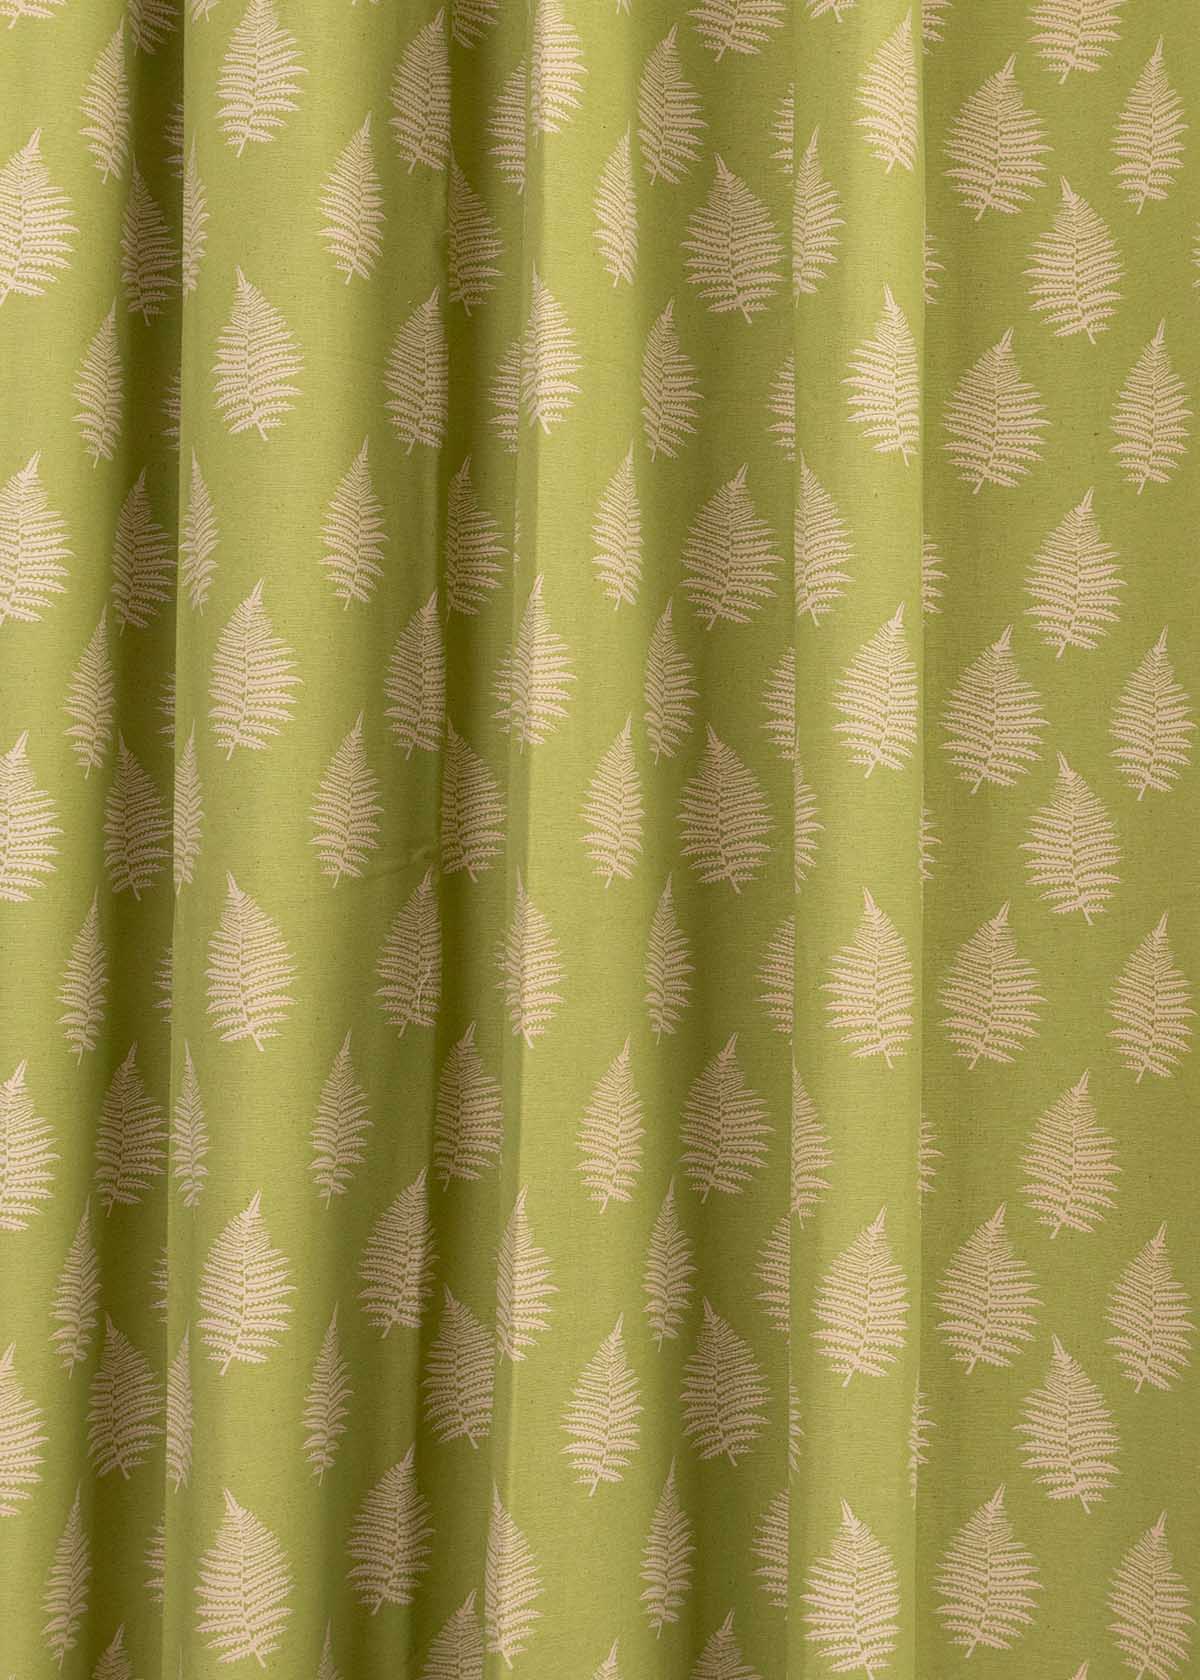 Ferns 100% Customizable Cotton floral curtain for living room - Room darkening - Green